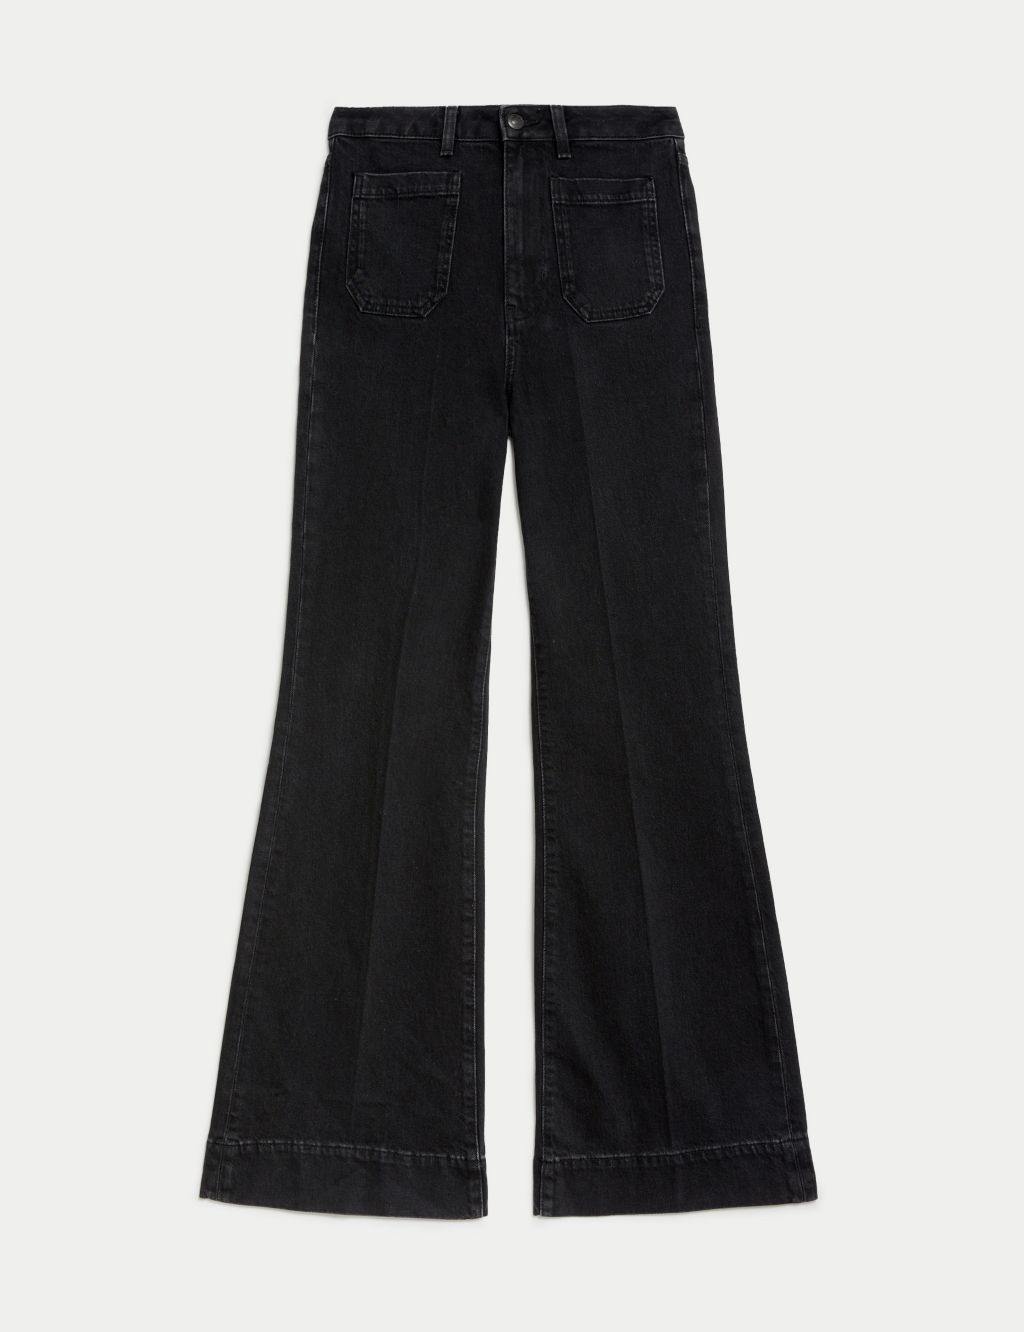 Patch Pocket Flare High Waisted Jeans 1 of 5